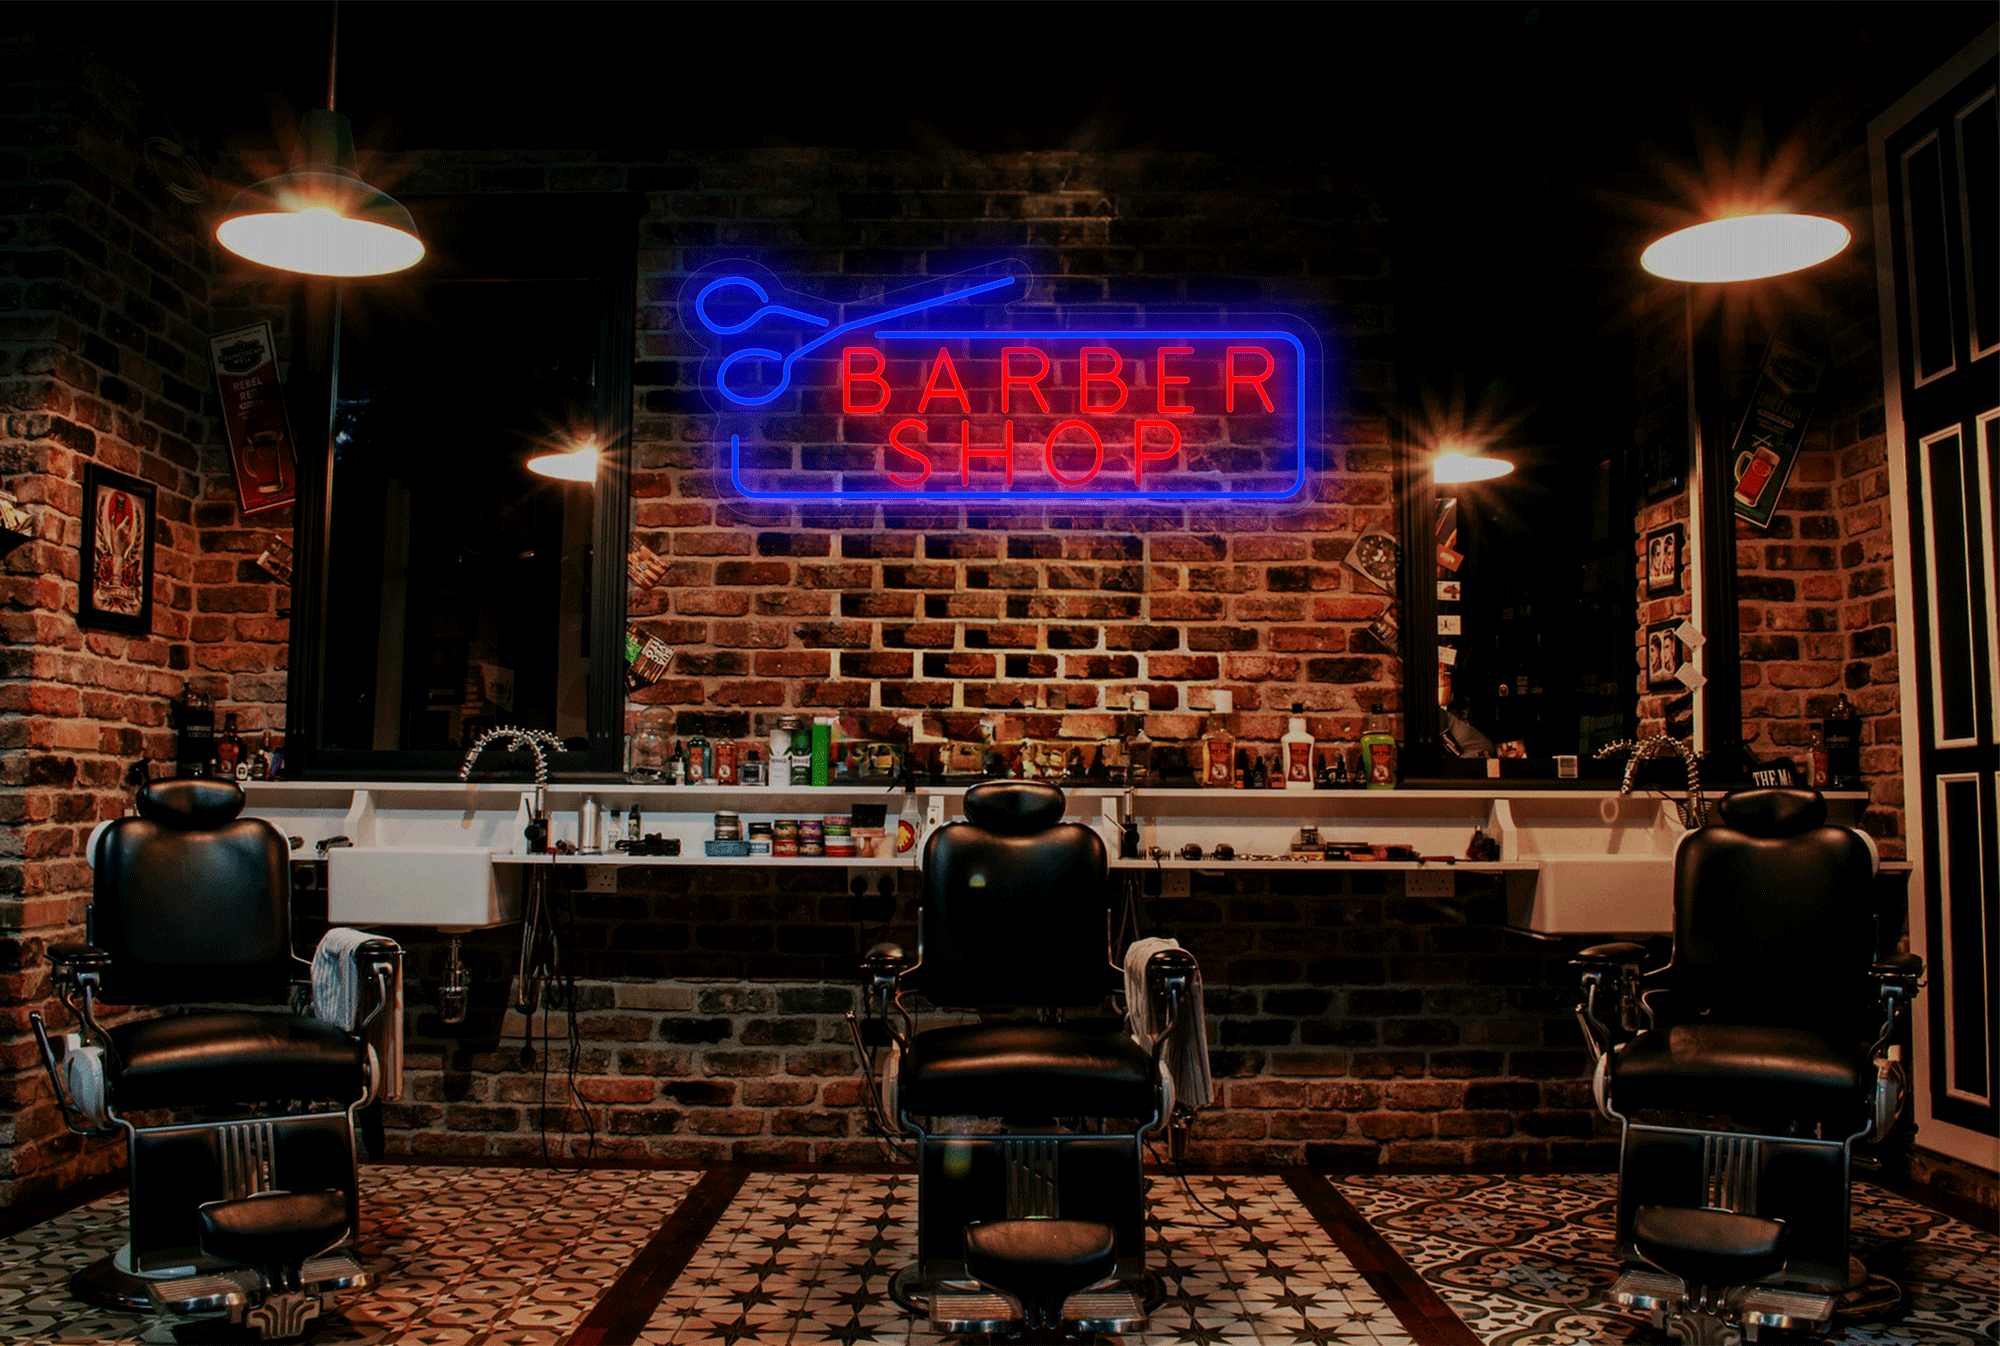 "Barber Shop" with Border and Scissor LED Neon Sign